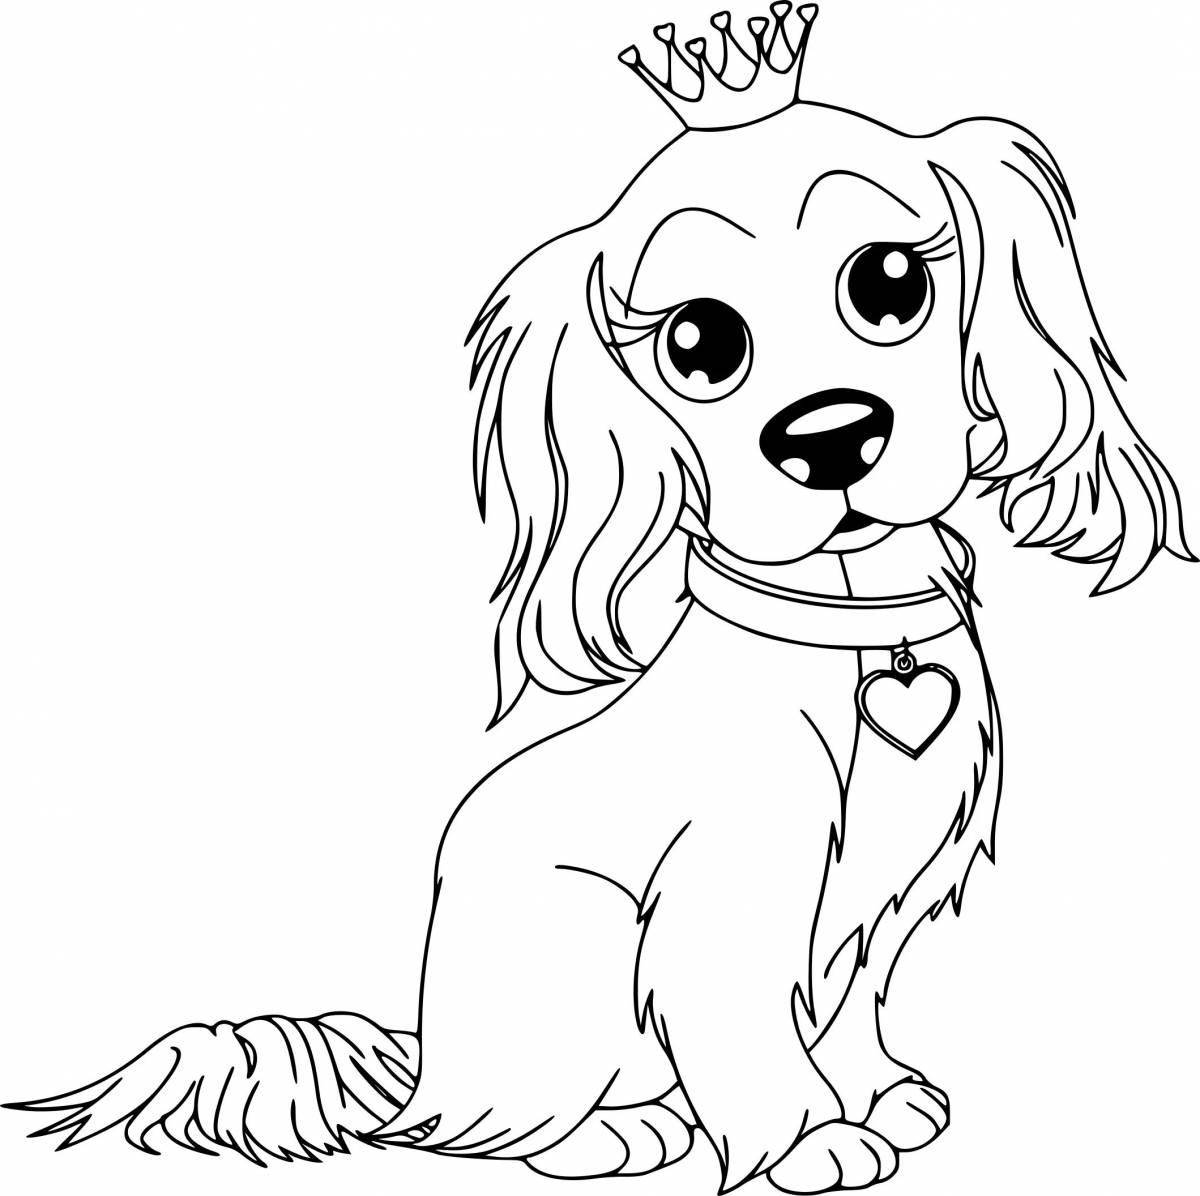 Wagging dog coloring page